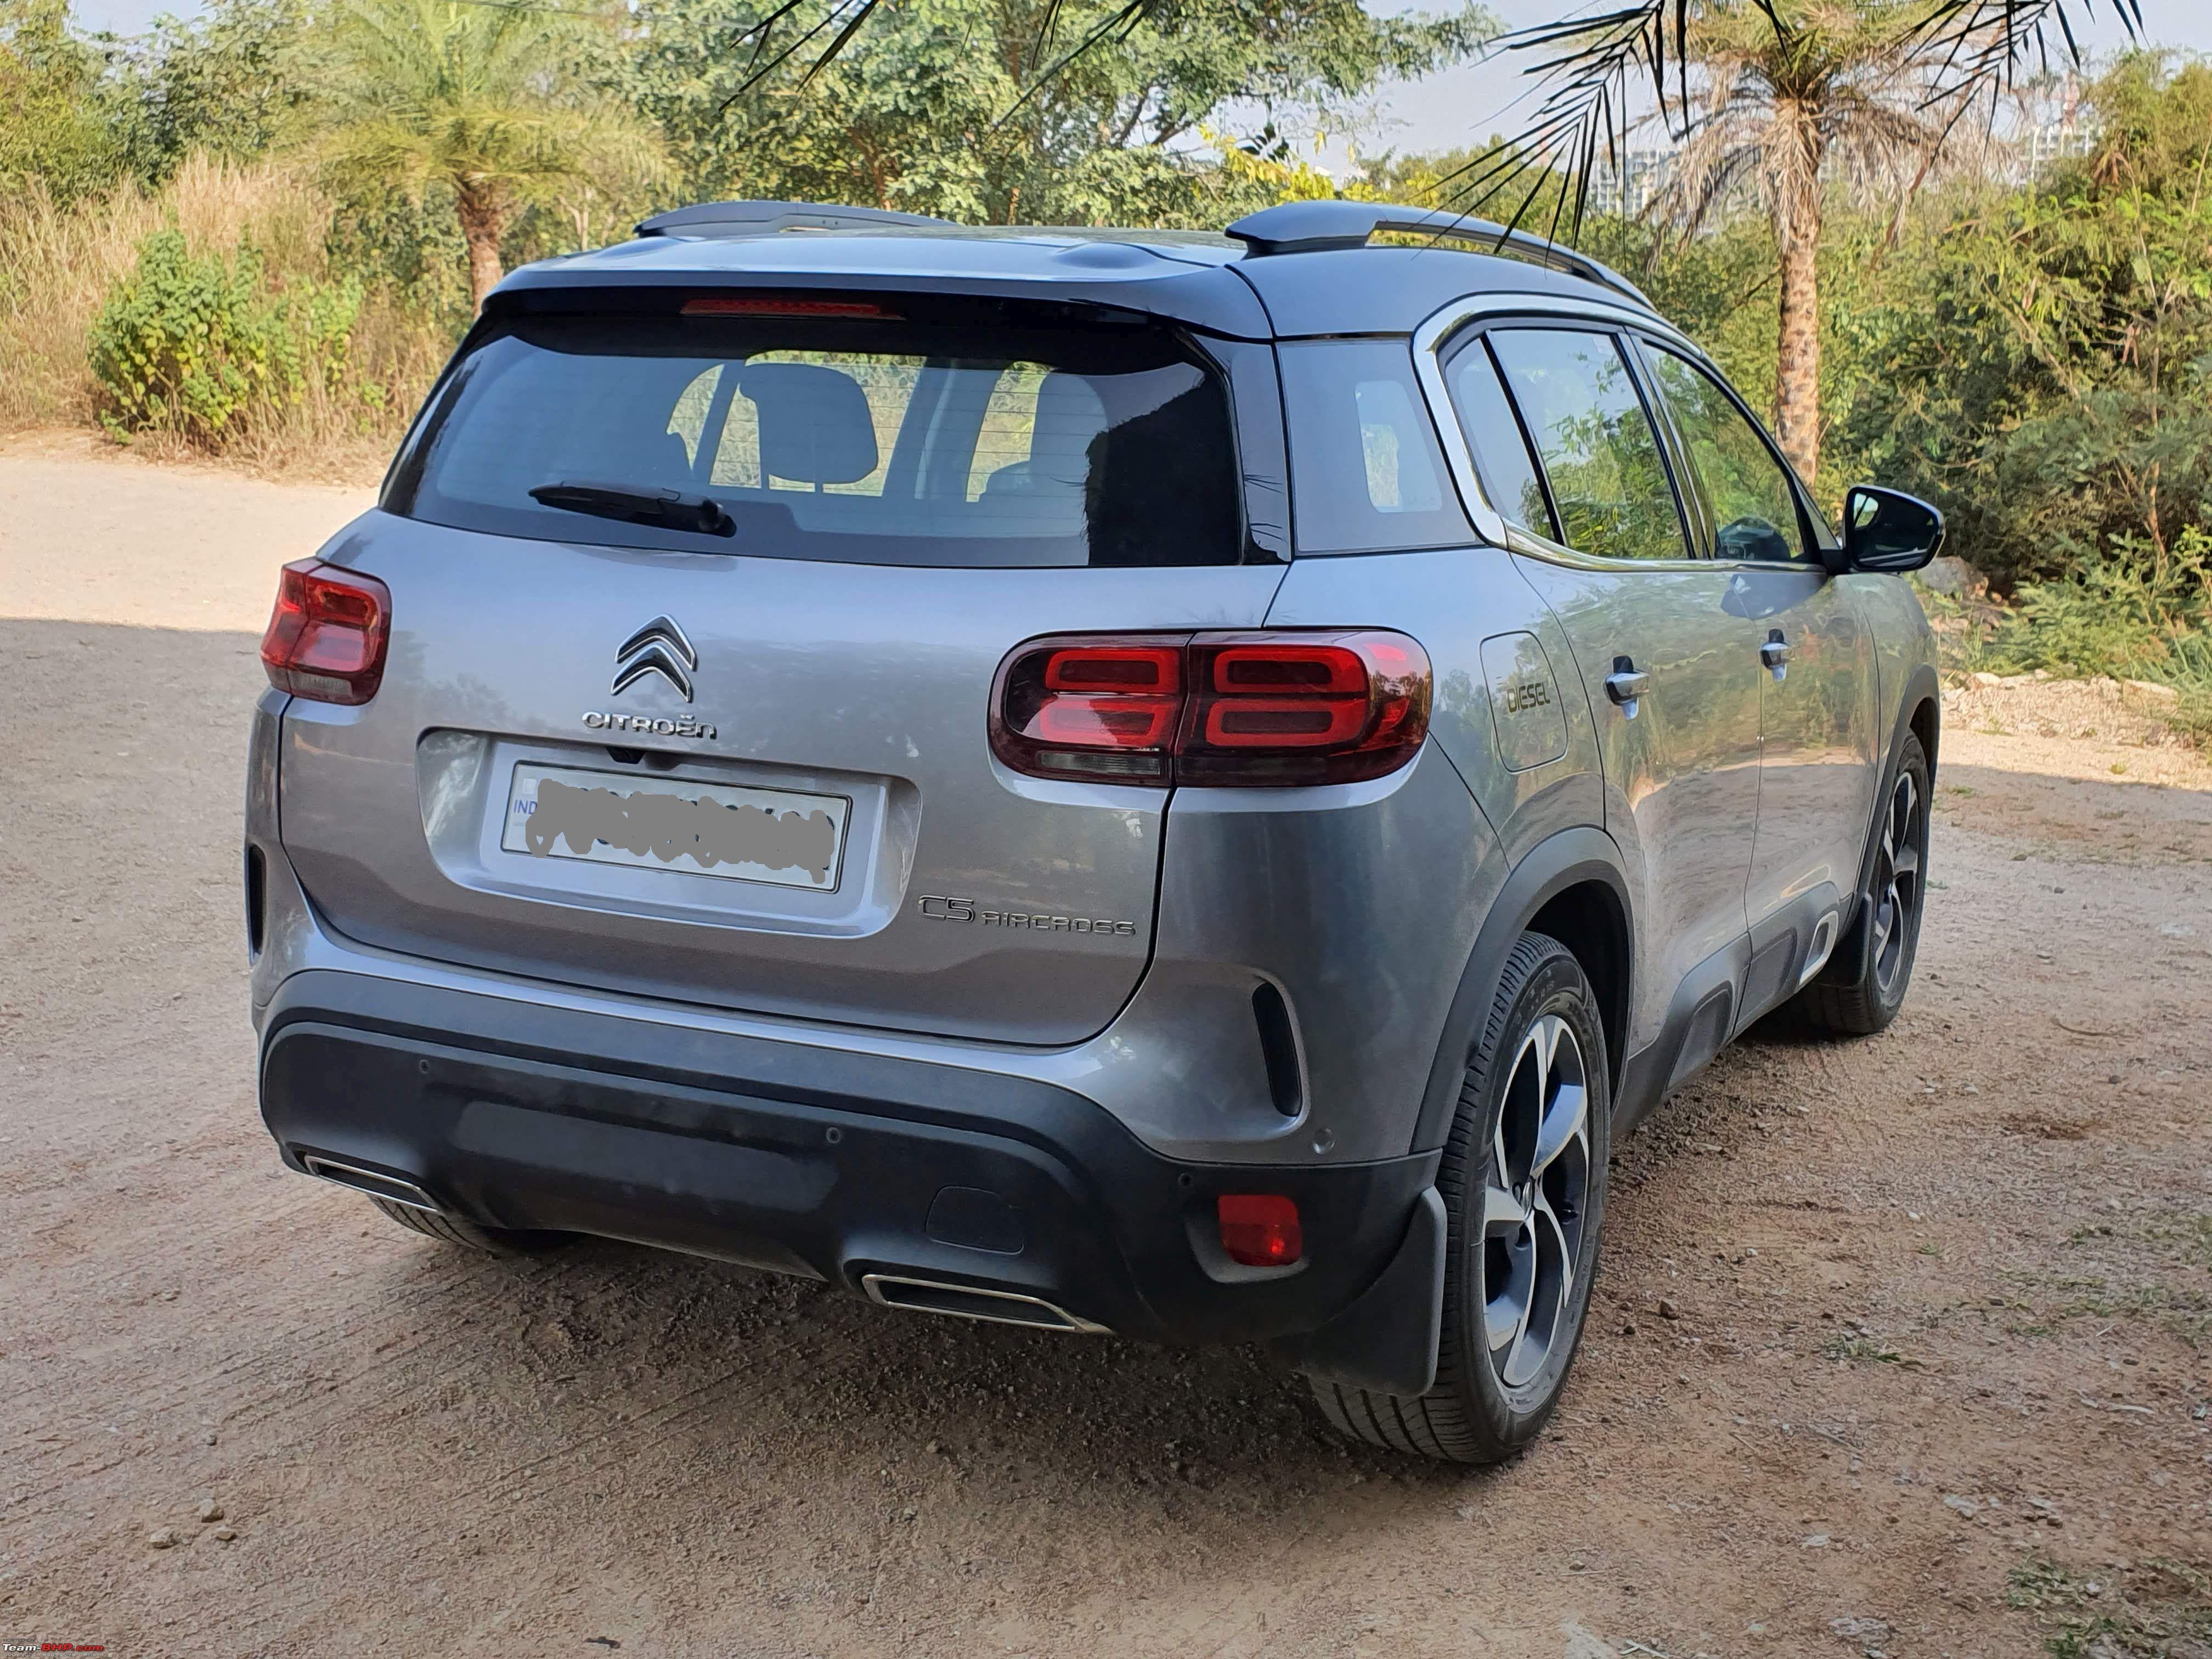 Citroen C5 Aircross Review - Page 28 - Team-BHP